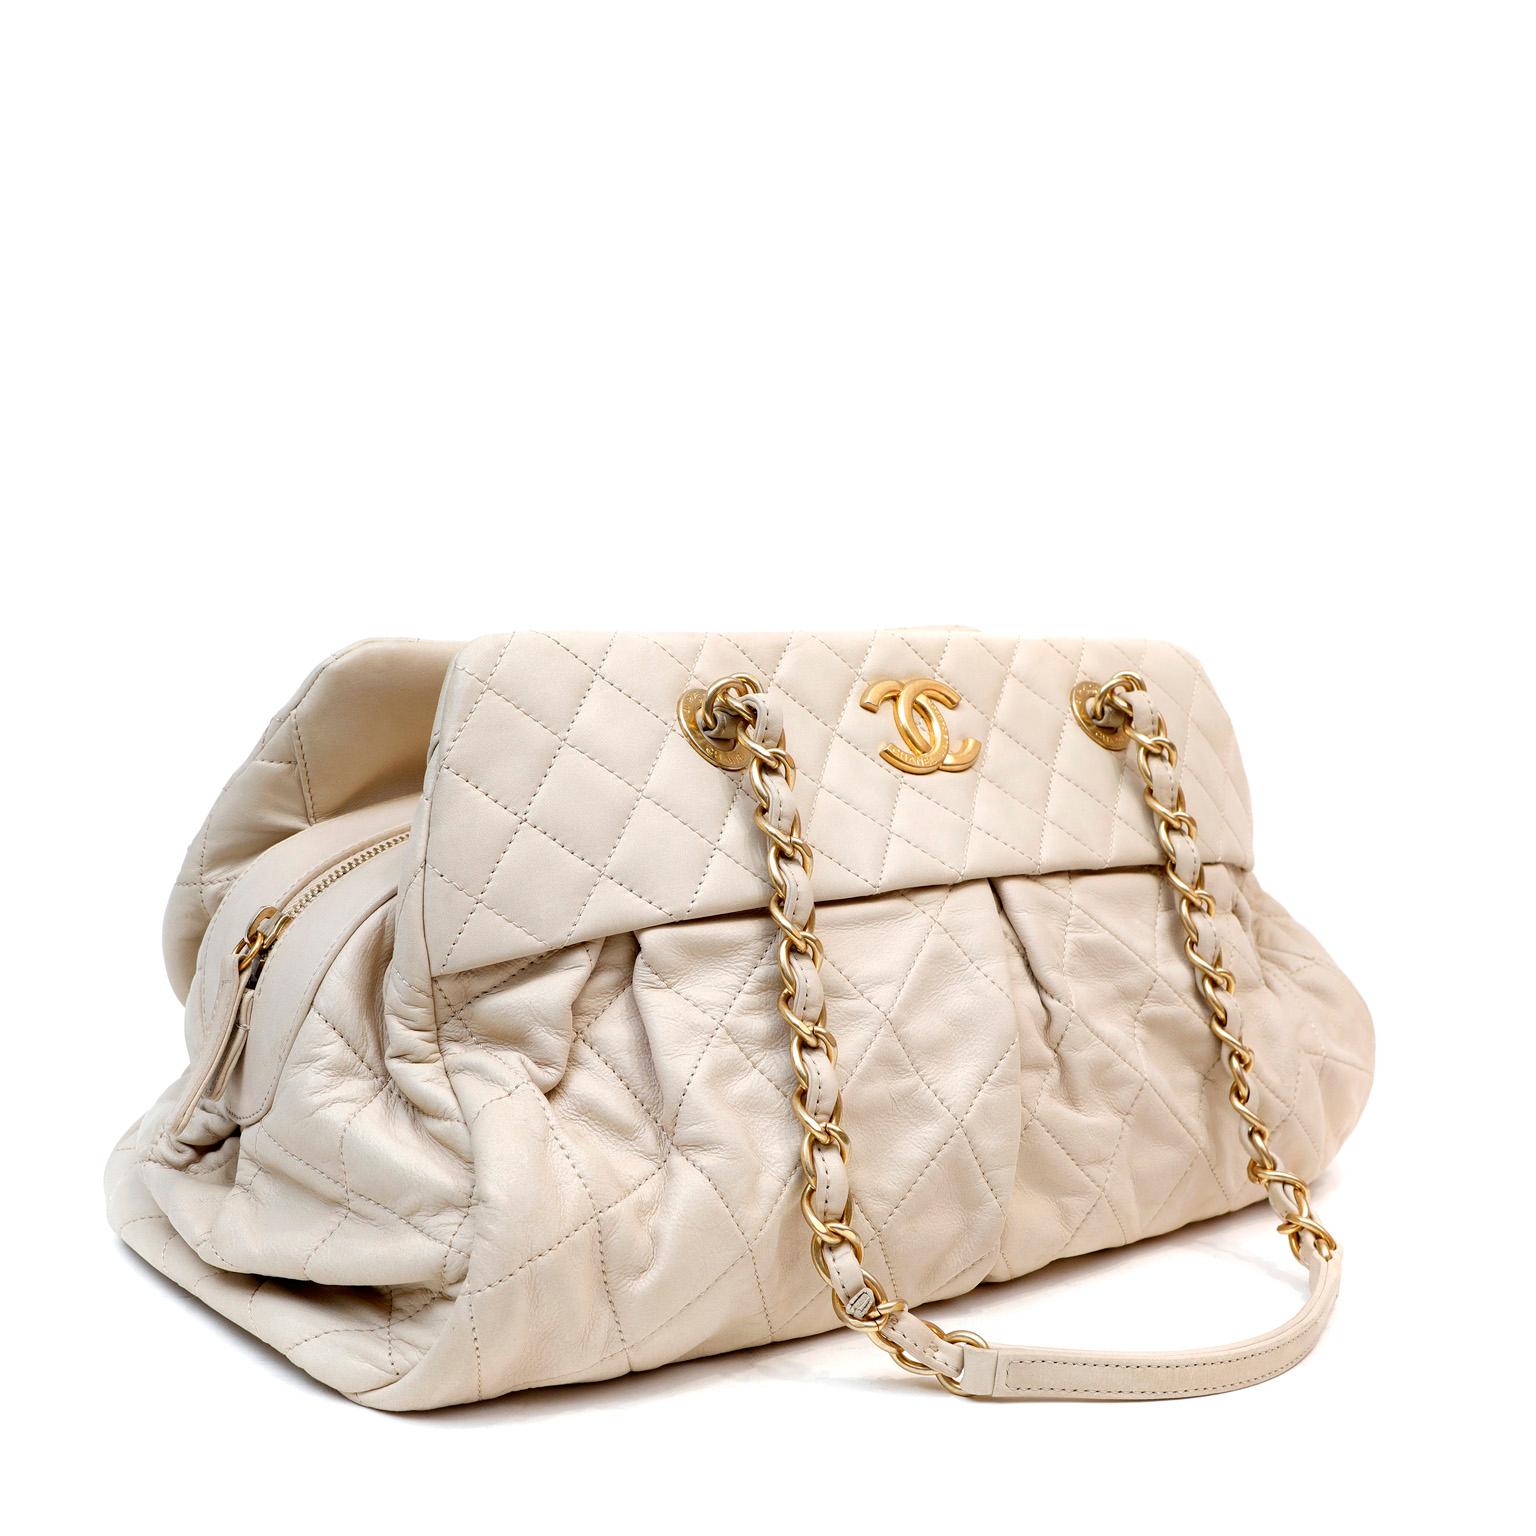 This authentic Chanel Beige Quilted Lambskin Day Tote is in excellent condition.  Perfectly scaled for daily enjoyment and neutral coloring to match any ensemble. 

Soft beige lambskin is topstitched in signature Chanel diamond pattern.  Feminine